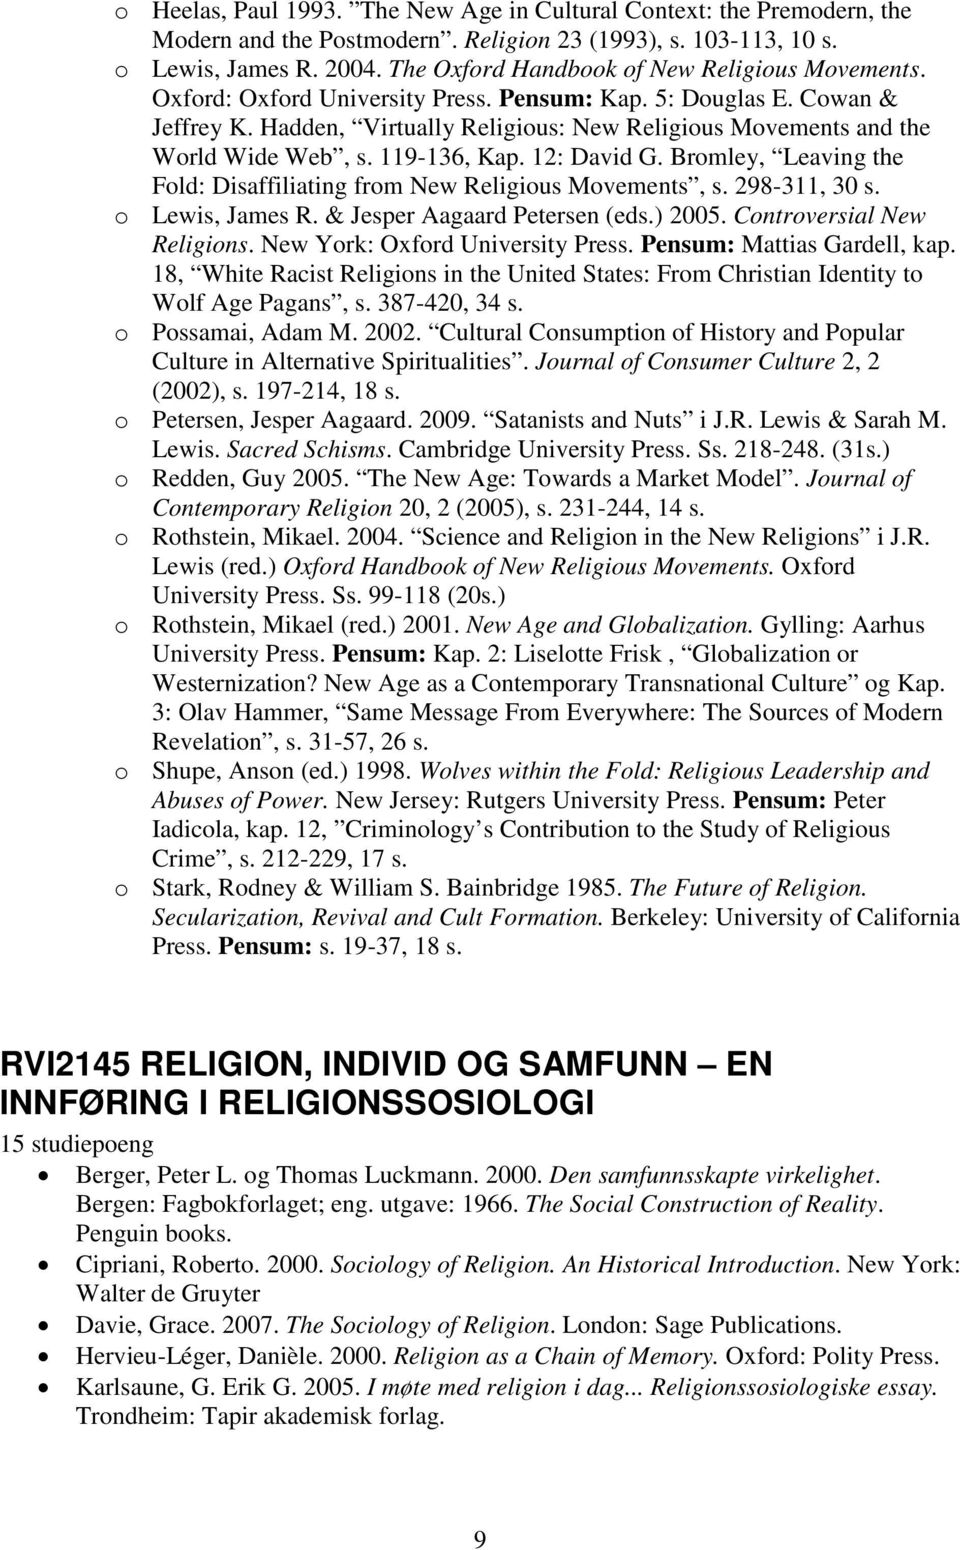 Hadden, Virtually Religious: New Religious Movements and the World Wide Web, s. 119-136, Kap. 12: David G. Bromley, Leaving the Fold: Disaffiliating from New Religious Movements, s. 298-311, 30 s.